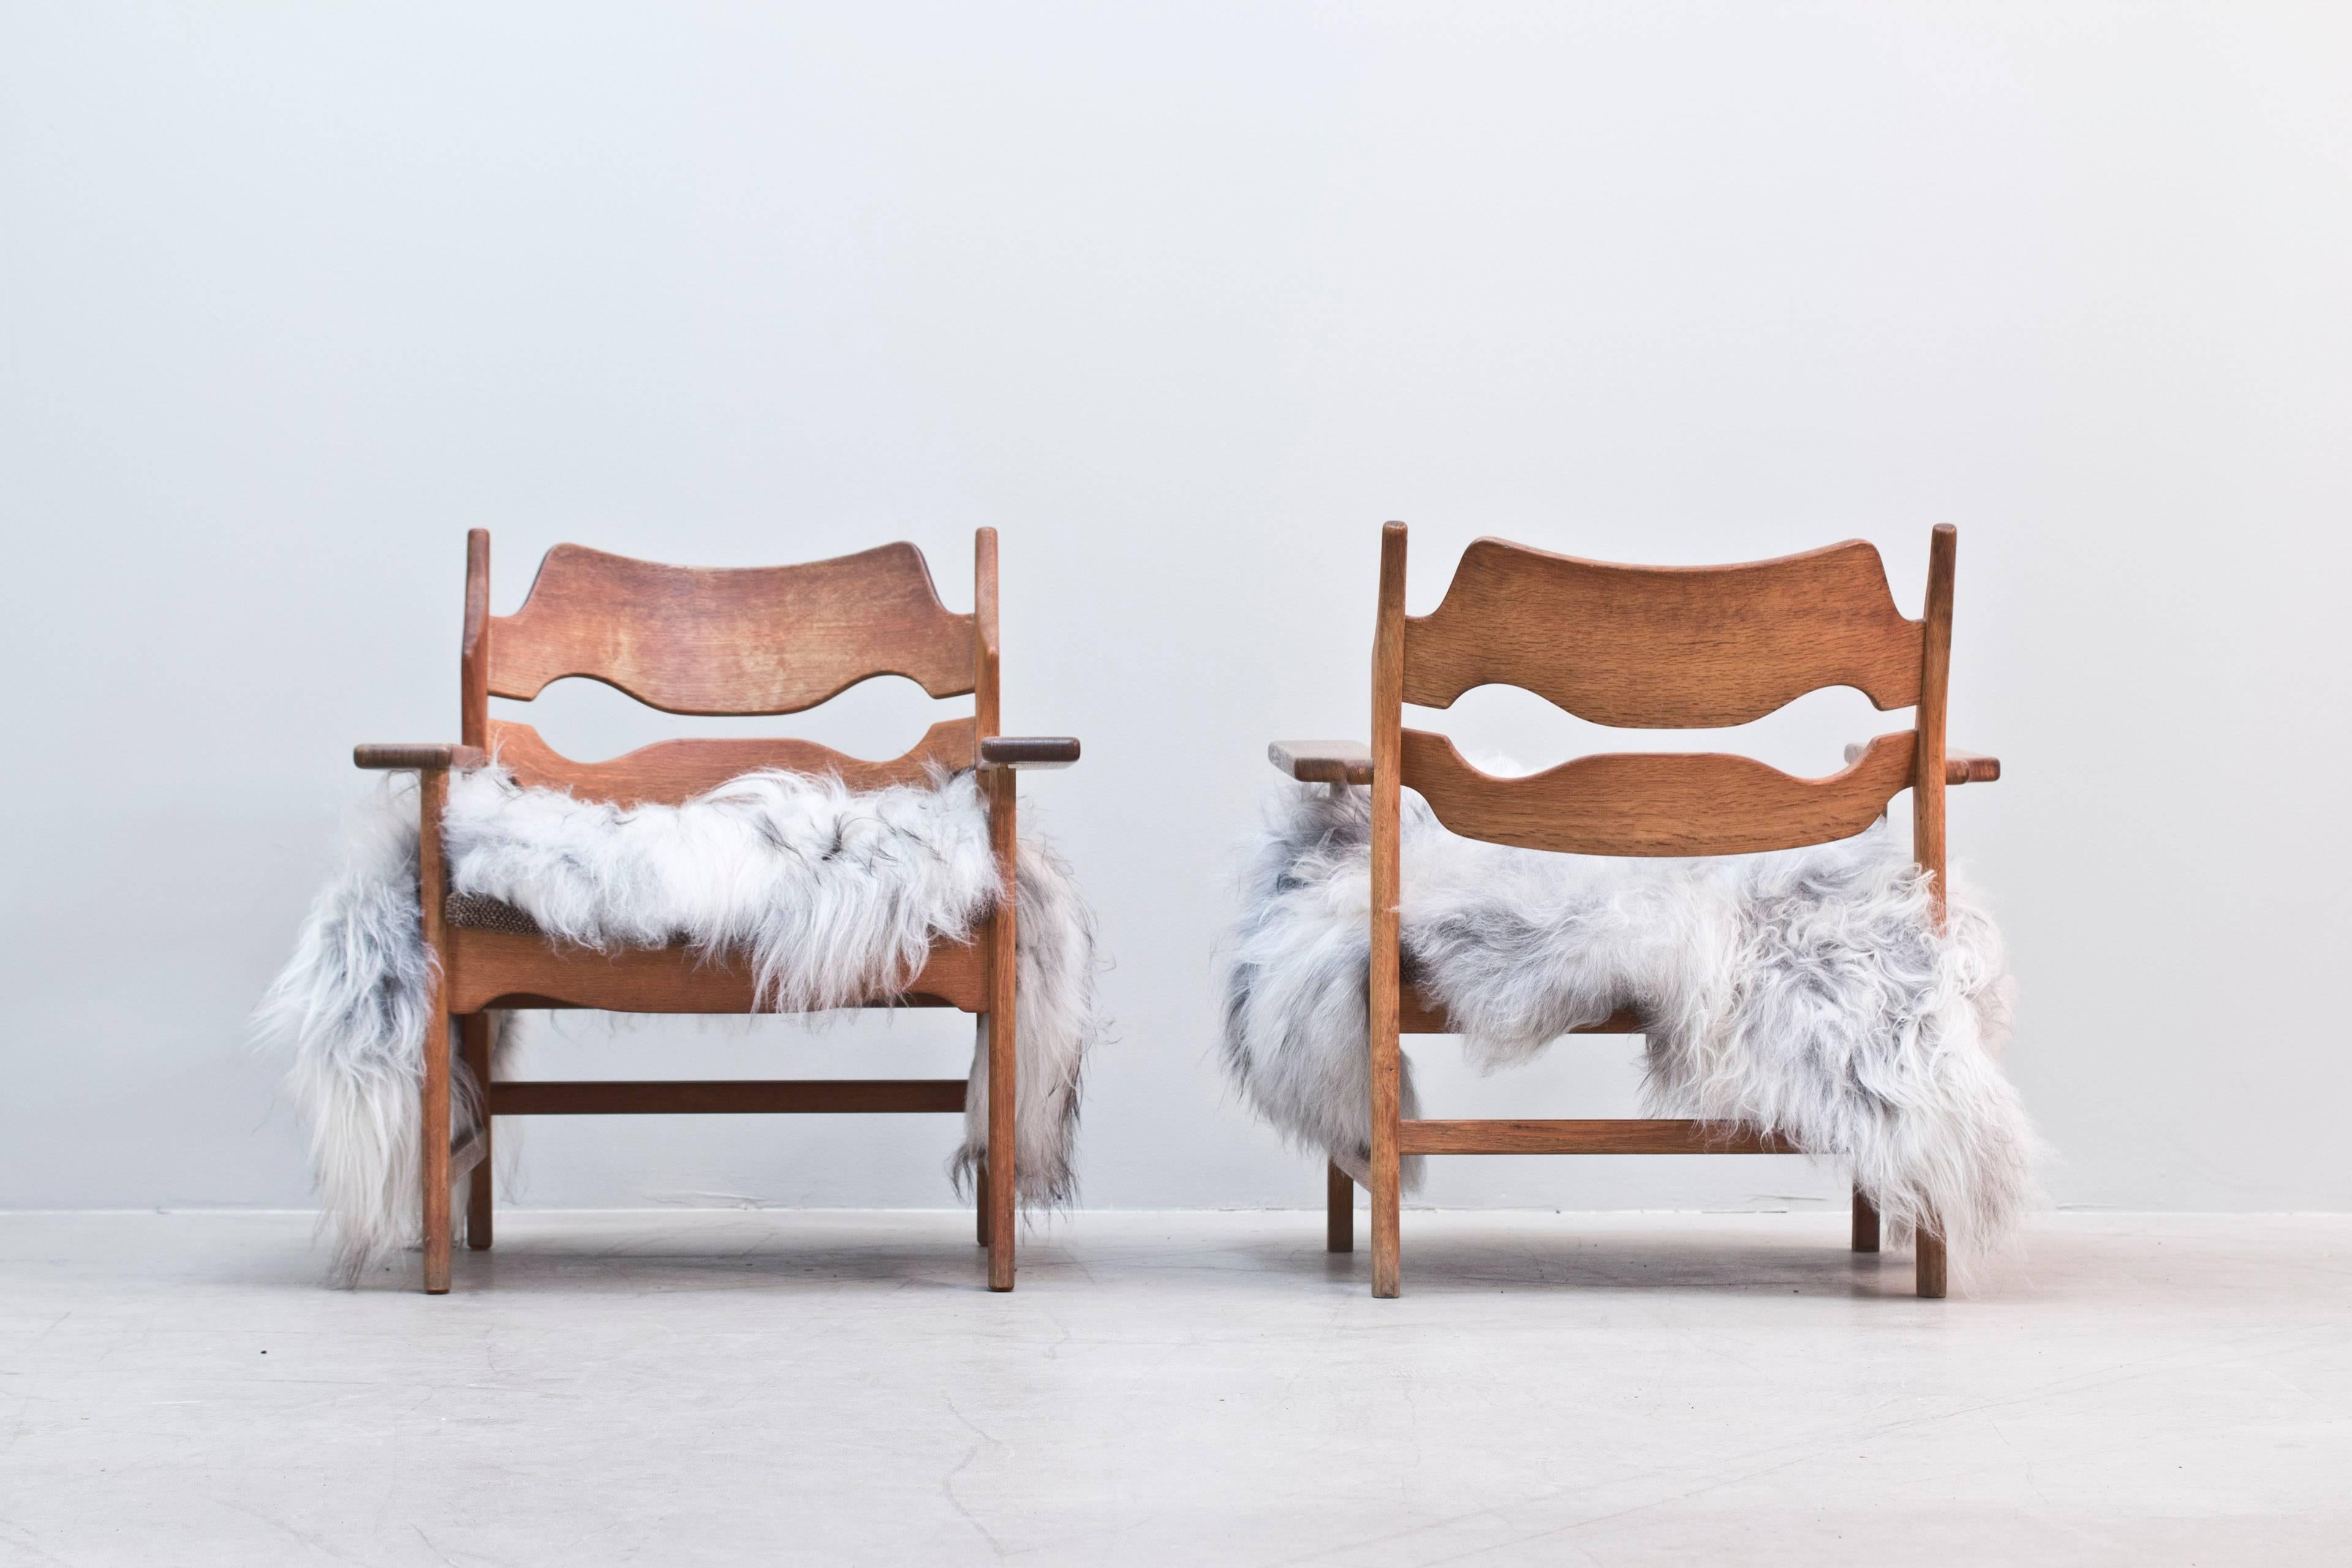 Pair of Danish armchairs in oak frame with original upholstery designed by Henning Kjaernulf. Covered in Icelandic sheepskin (removable). 

Please contact us for ideas of new upholstery if requested.